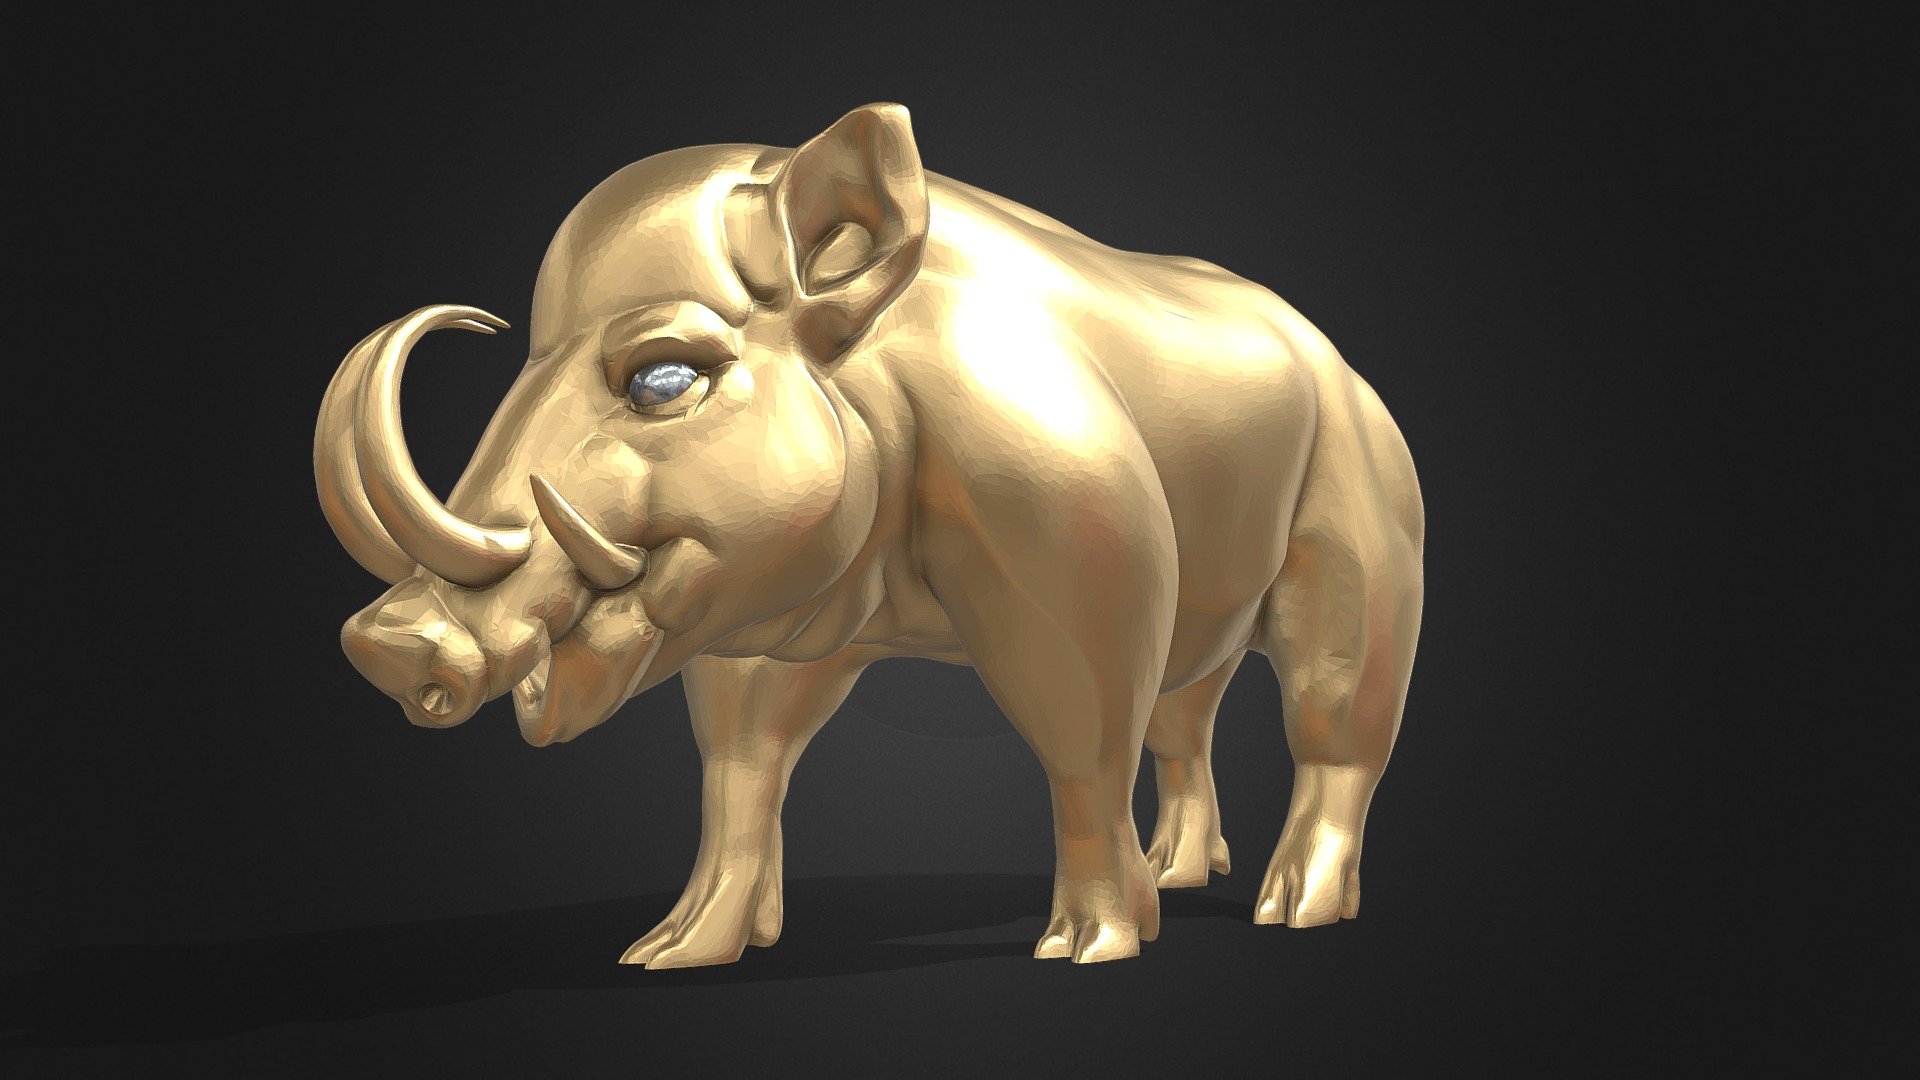 Realistic Animal with high resolution polygonal with gold material and Clear black background make it realistic and so cute.

Recomended For:


Basic modeling 
Rigging 
Sculpting 
Become Statue
Decorate
3D Print File
Toy
visualization

Have fun  :) - Gold Babirusa Pose - Buy Royalty Free 3D model by Puppy3D 3d model